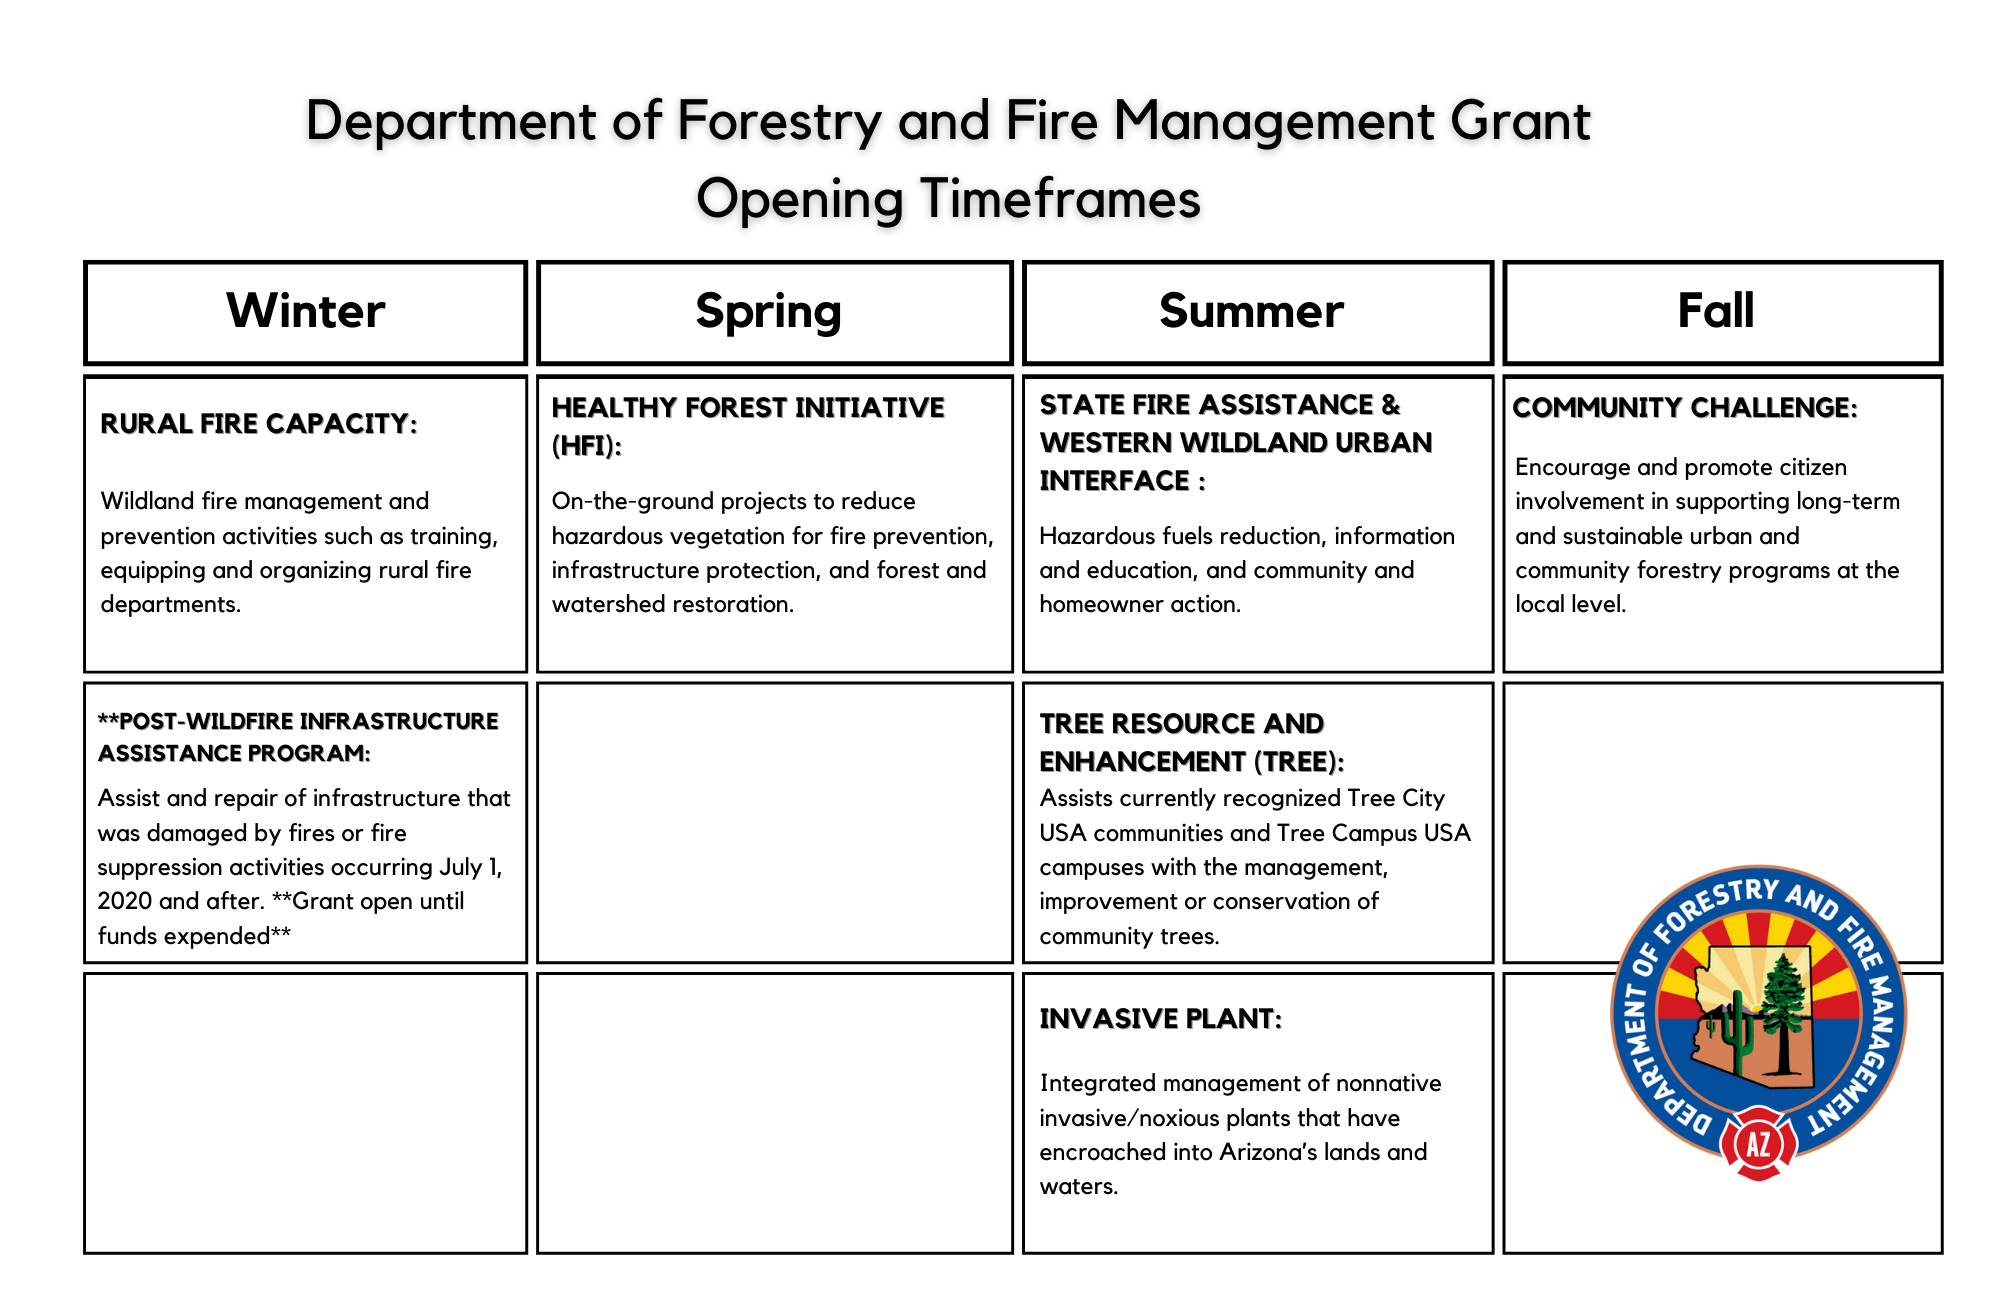 DFFM Grant Timeline for Applications and Openings